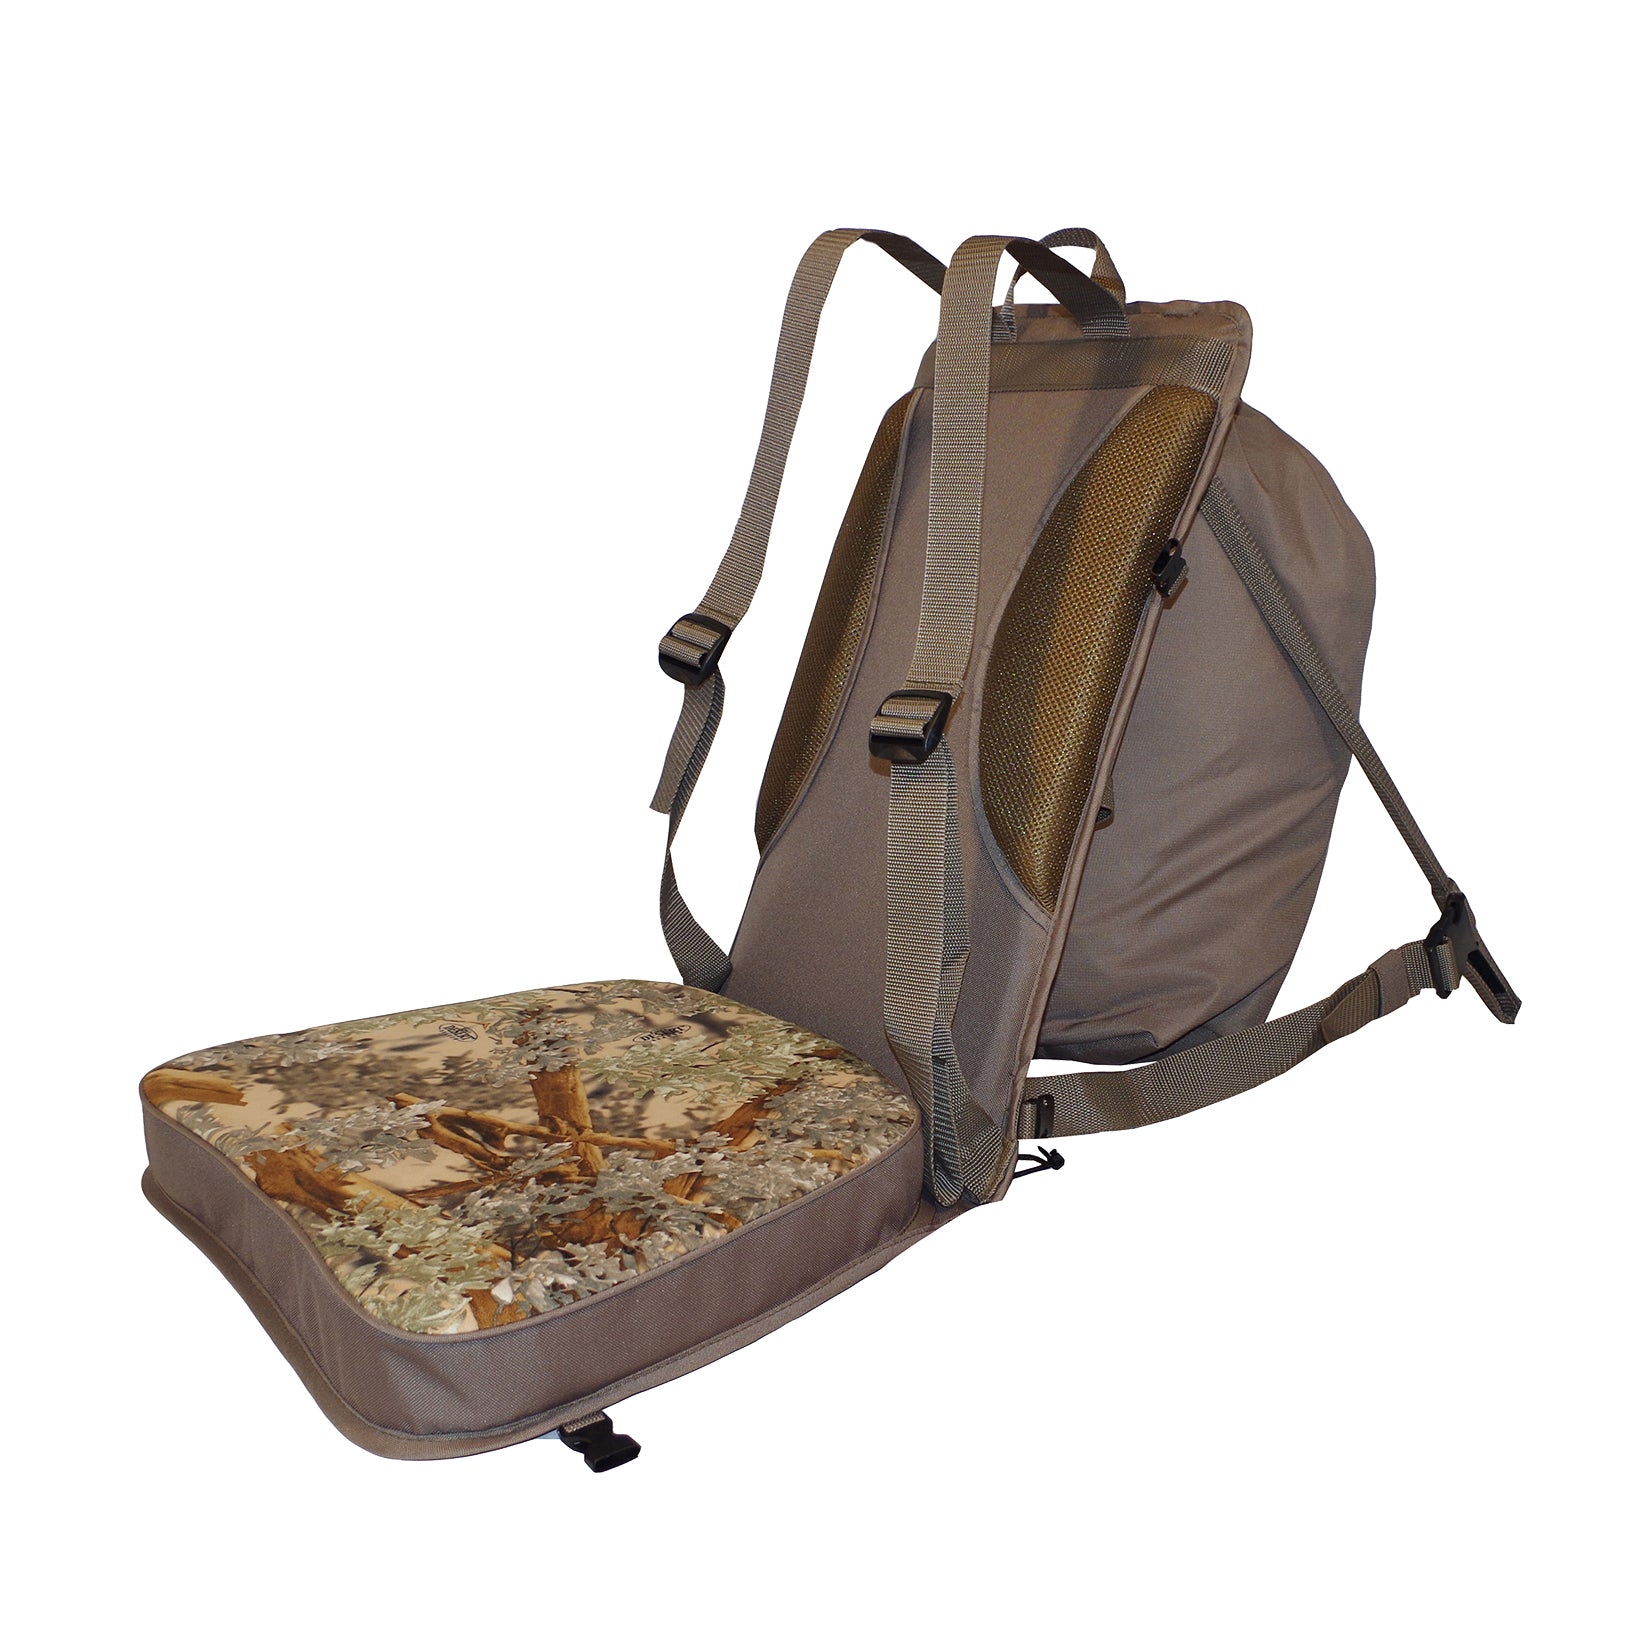 Sly Dog Ground & Pound Chair | King's Camo